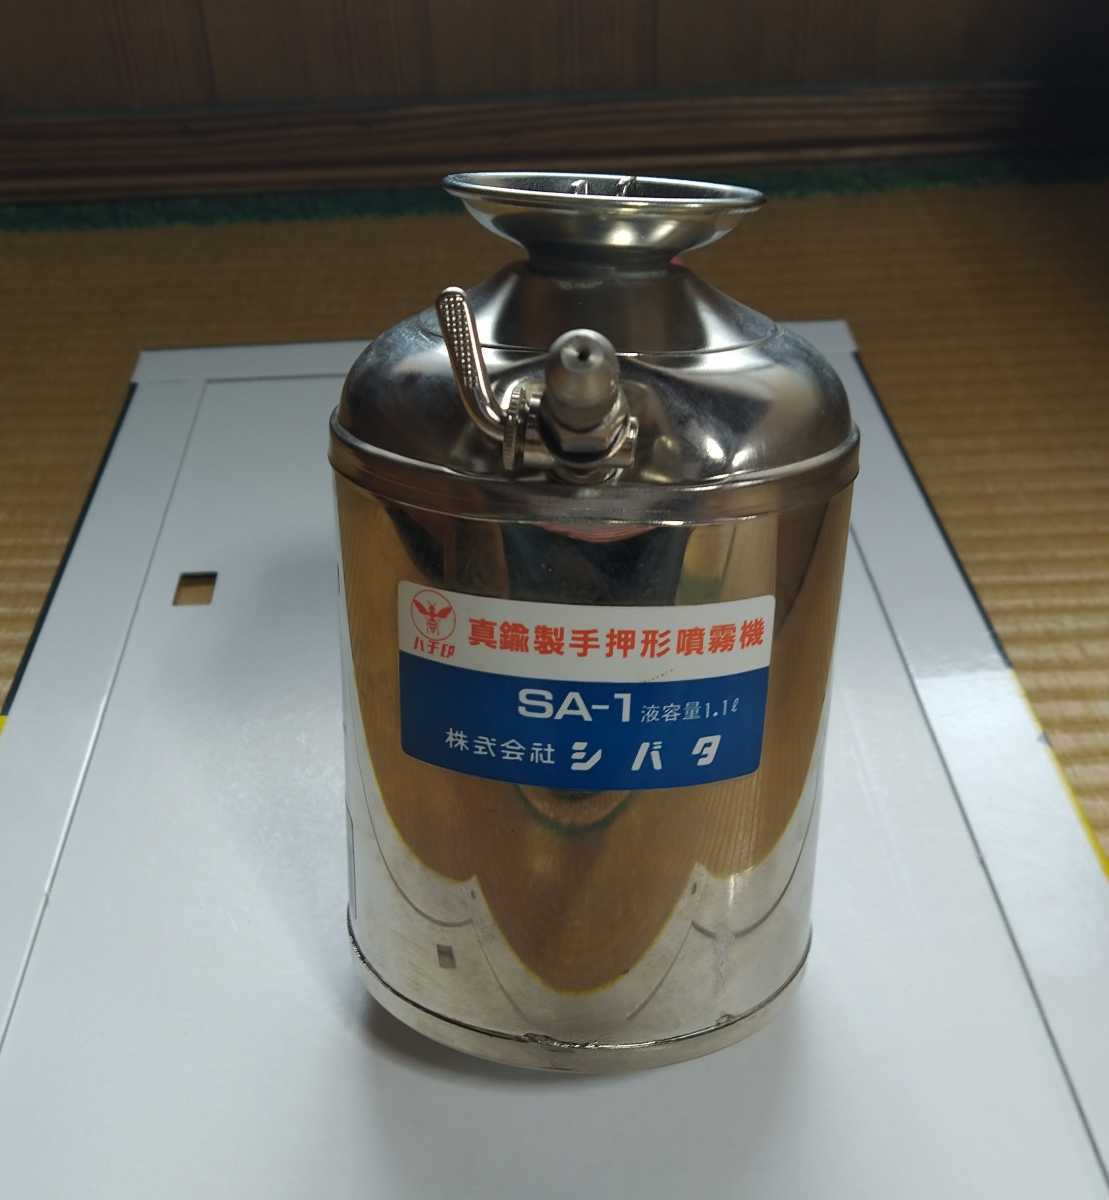  bee seal brass made hand pushed type spray machine SA-1 capacity 1.1L pesticide scattering exclusive use stock period . long therefore somewhat there is dirt.